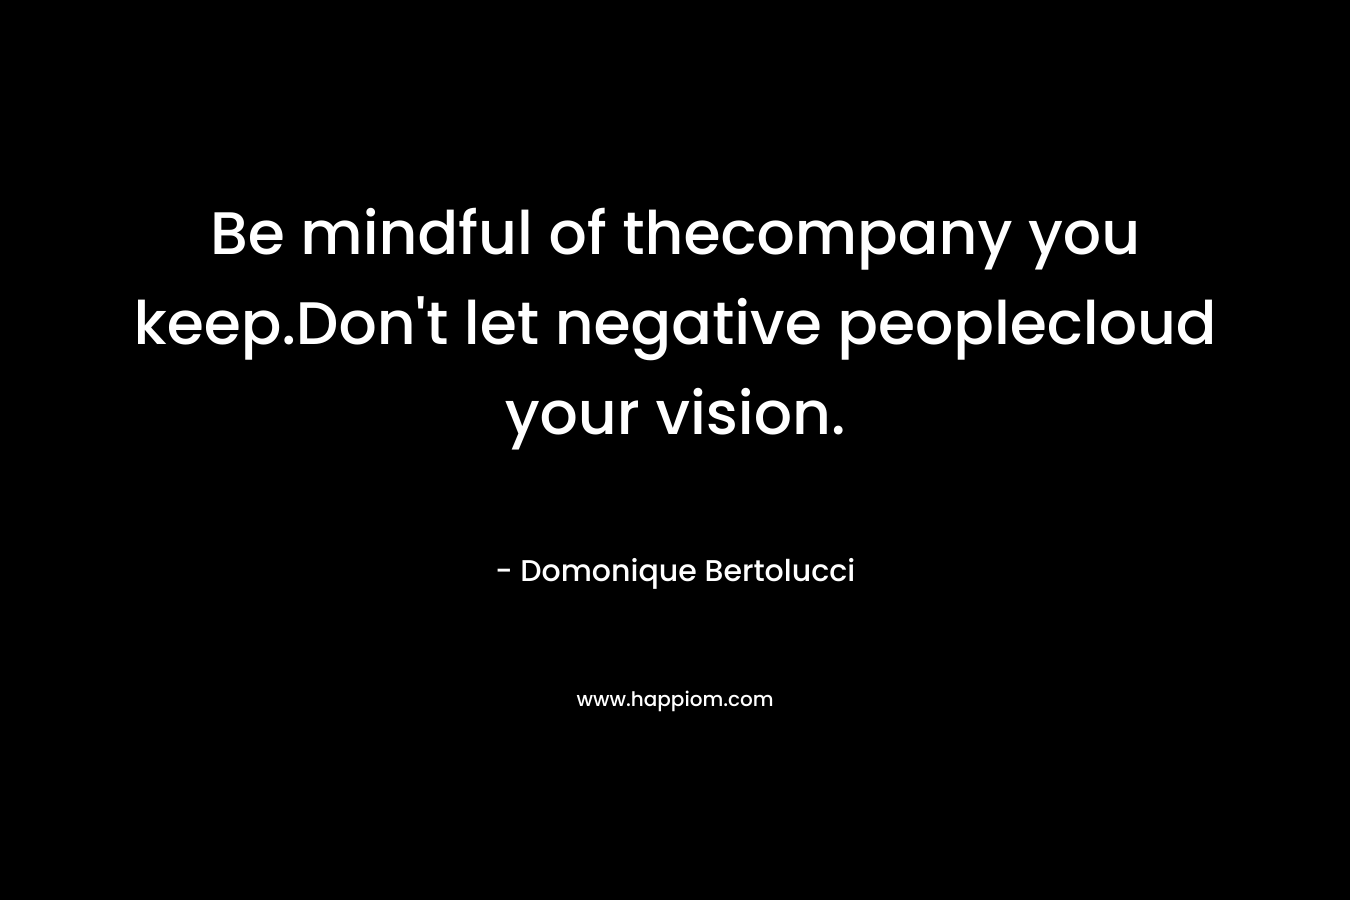 Be mindful of thecompany you keep.Don’t let negative peoplecloud your vision. – Domonique Bertolucci